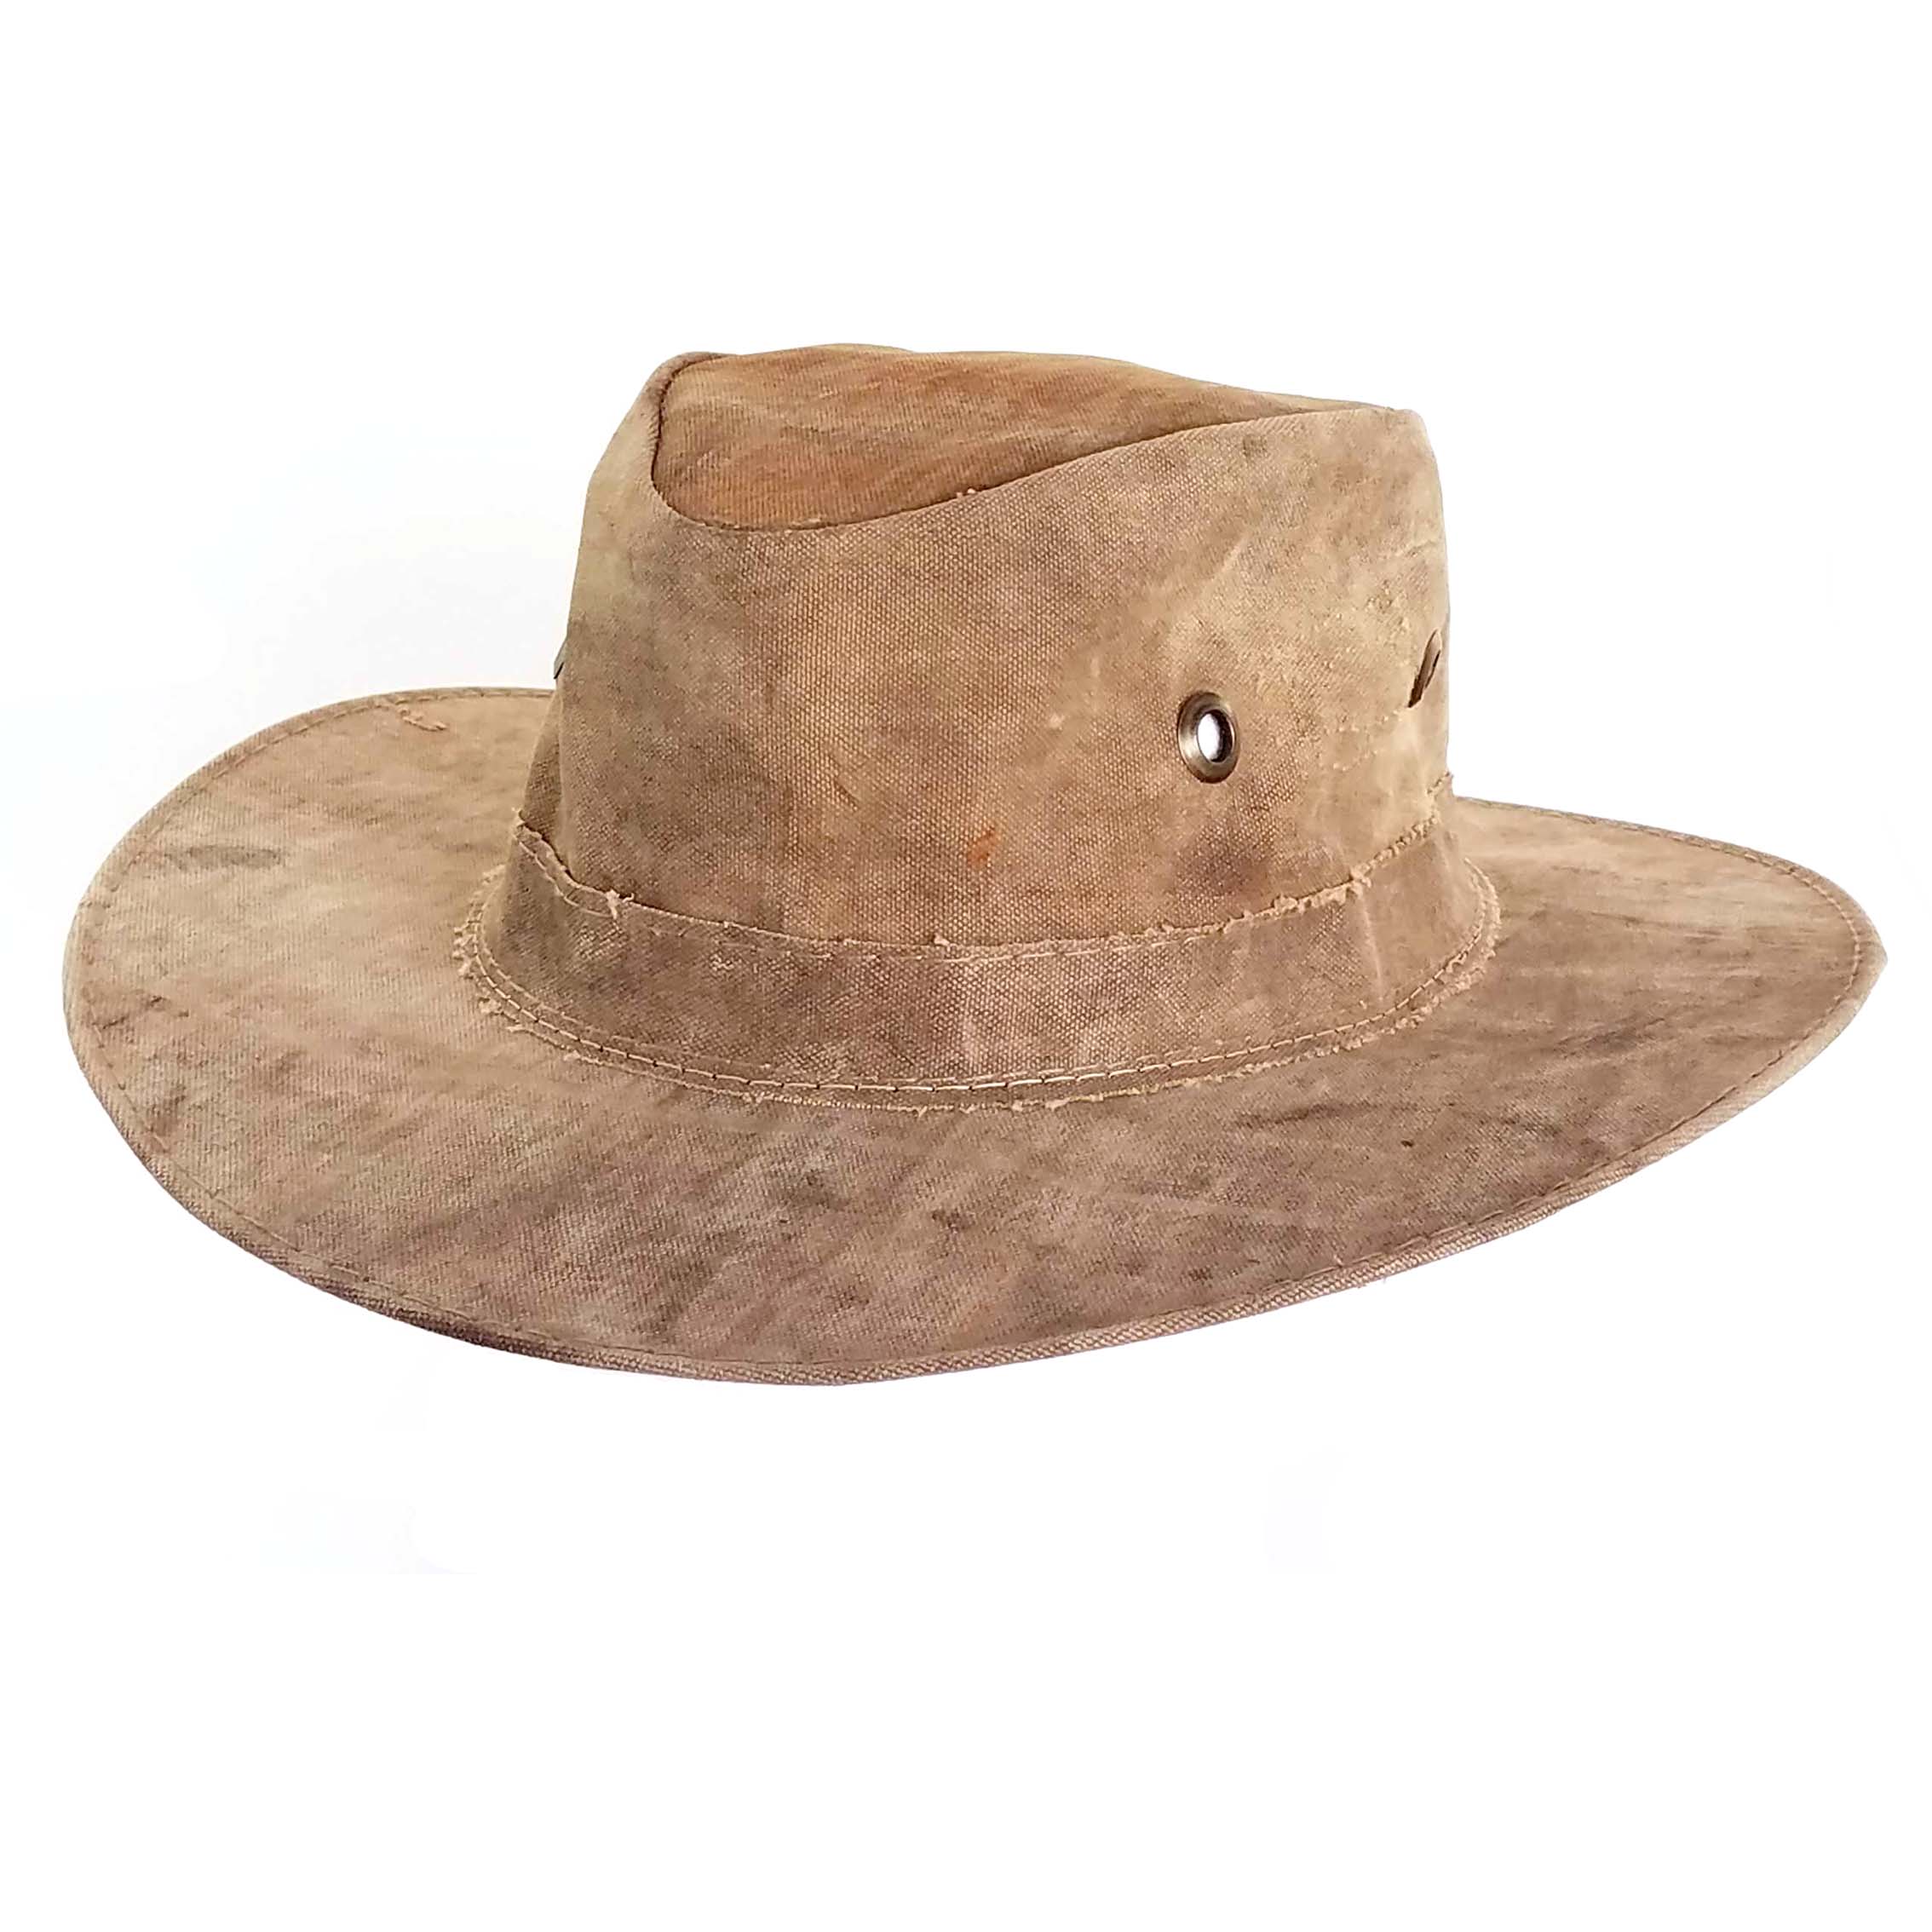 Canvas Denim Breezy Hat Outback/Aussie Style Hand Crafted in South Africa 